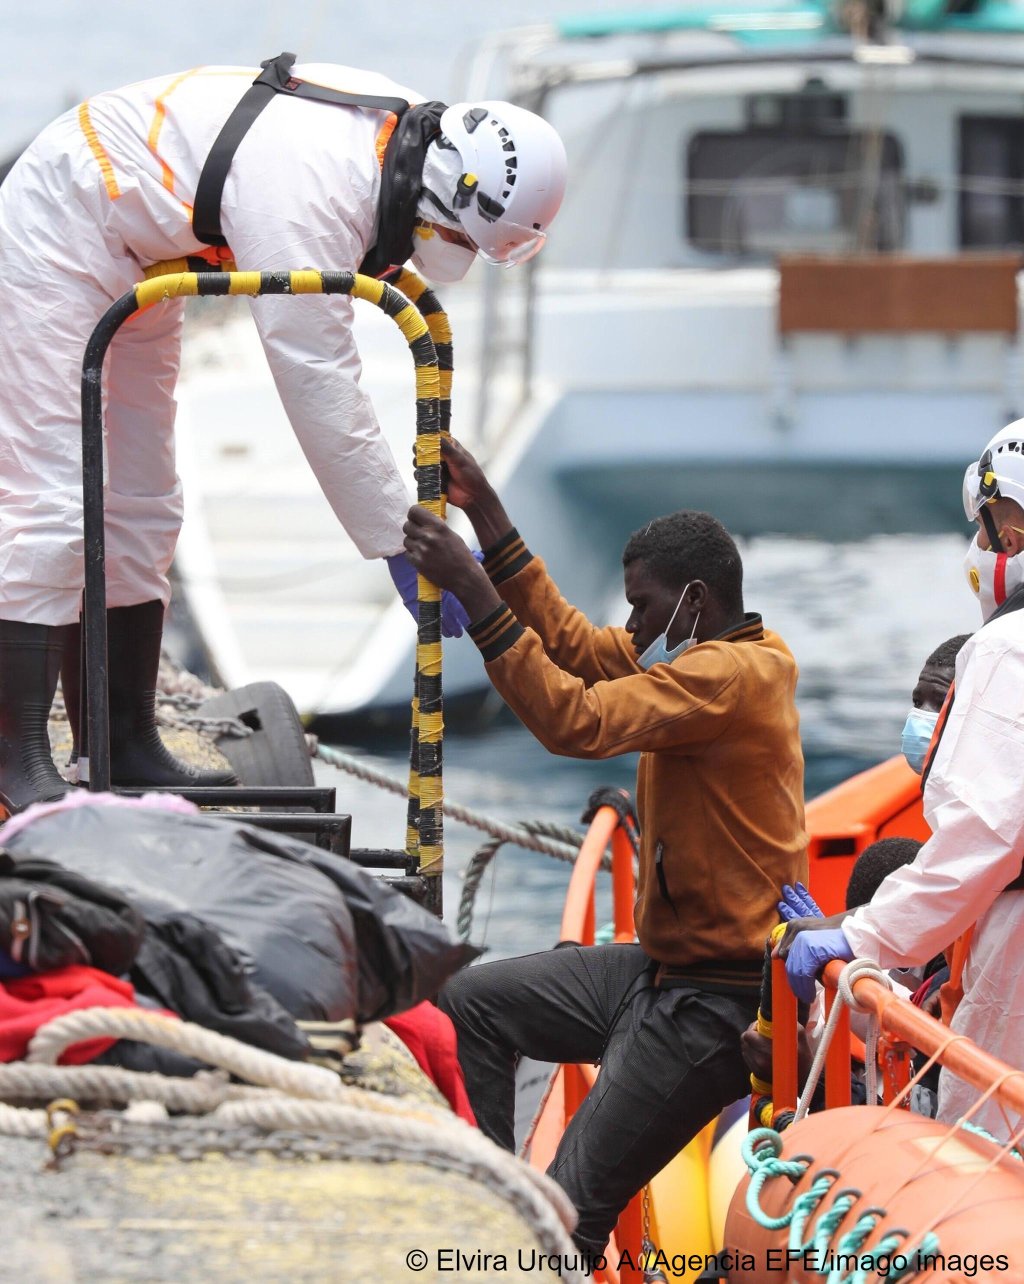 Spanish Salvamento Maritimo members rescue a total of 45 migrants who traveled on board a small boat trying to reach the Canary Islands on June 20, 2021 | Photo: Elvira Urquijo/EFE/imago